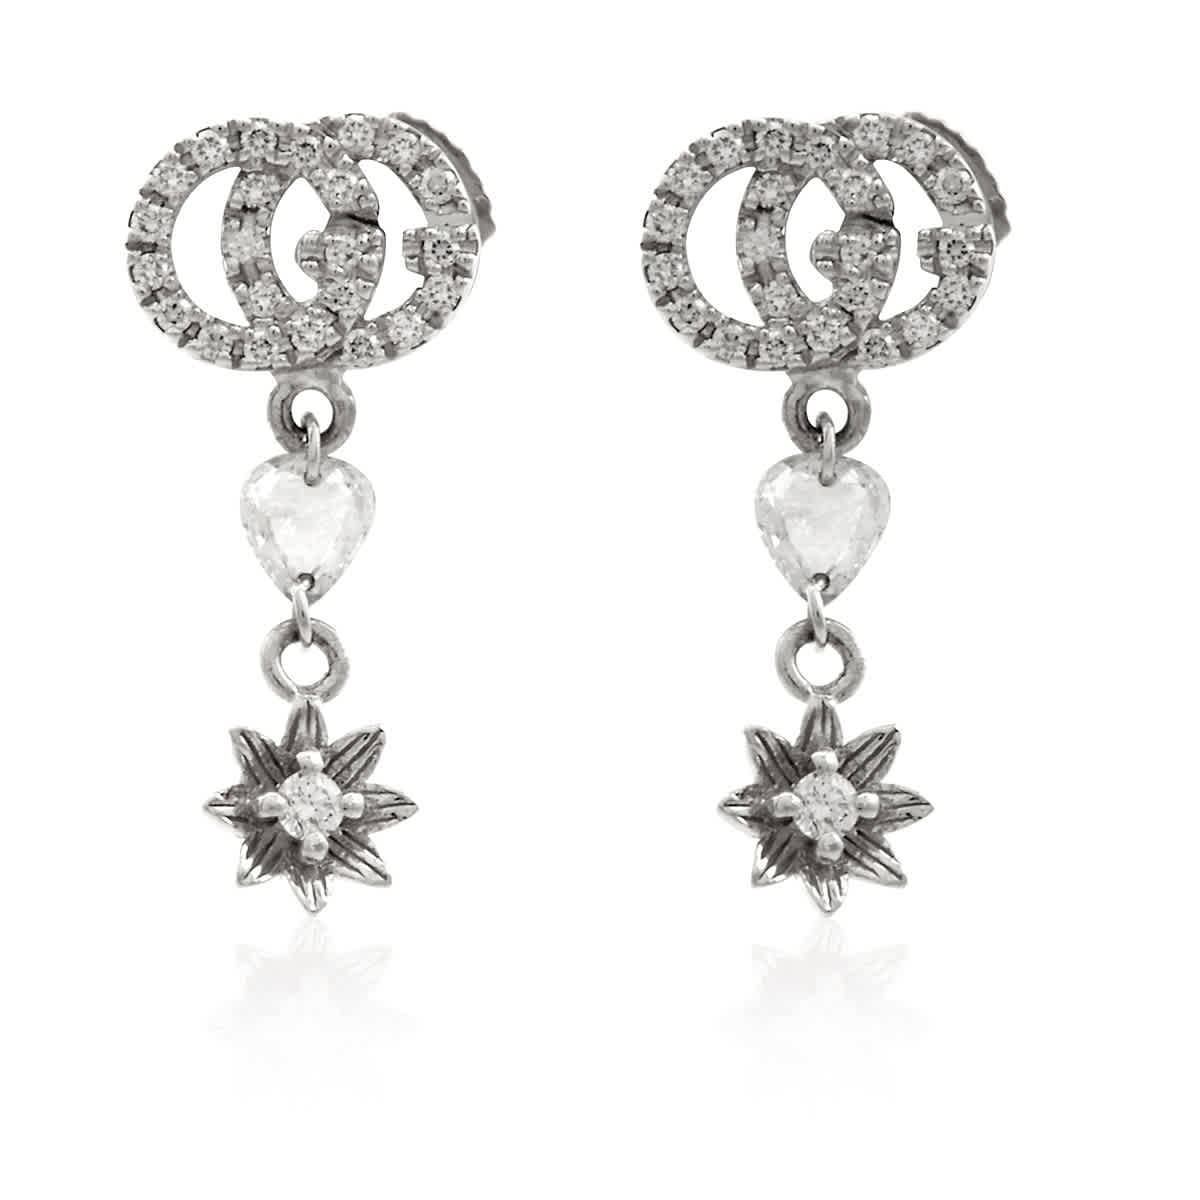 GUCCI GUCCI LADIES FLOWER AND DOUBLE G EARRINGS WITH DIAMONDS